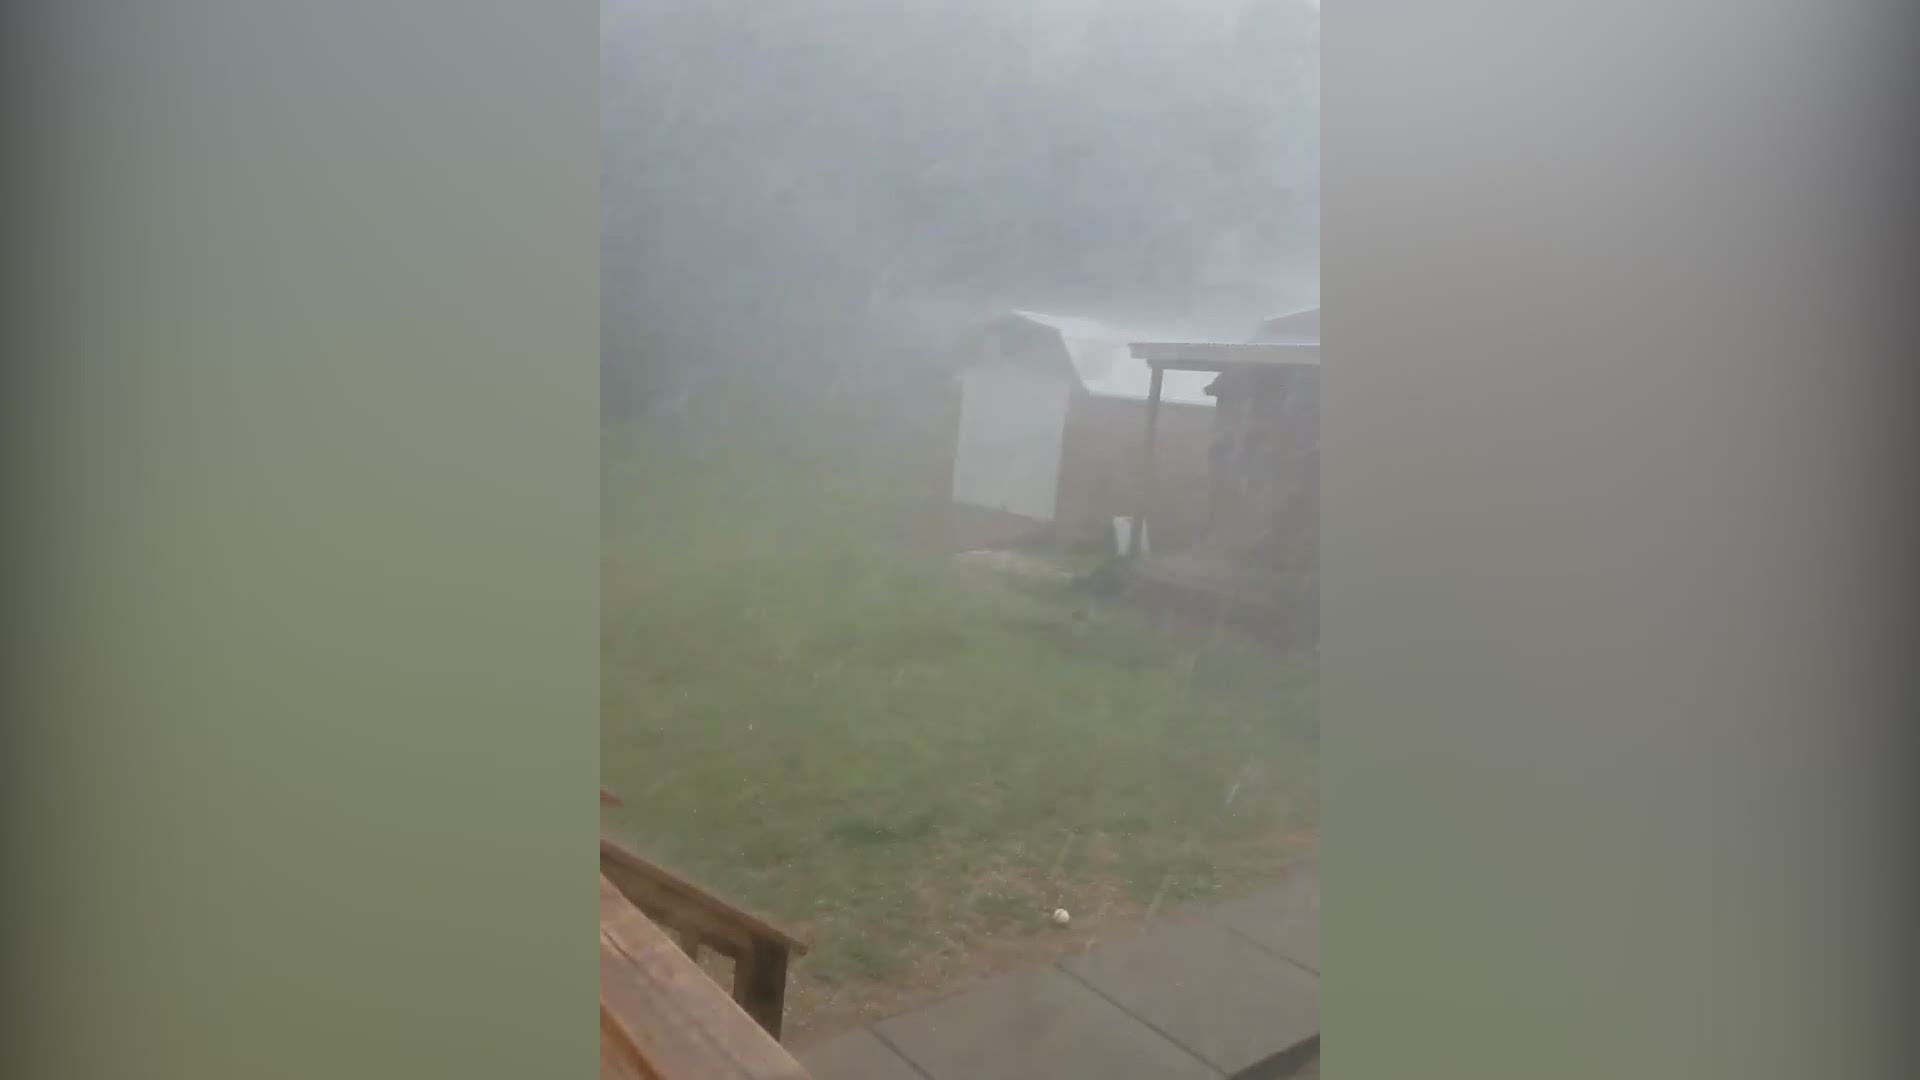 Tim Habiuk sent us video of the wet microburst in Kannapolis with winds over 60 mph and hail.